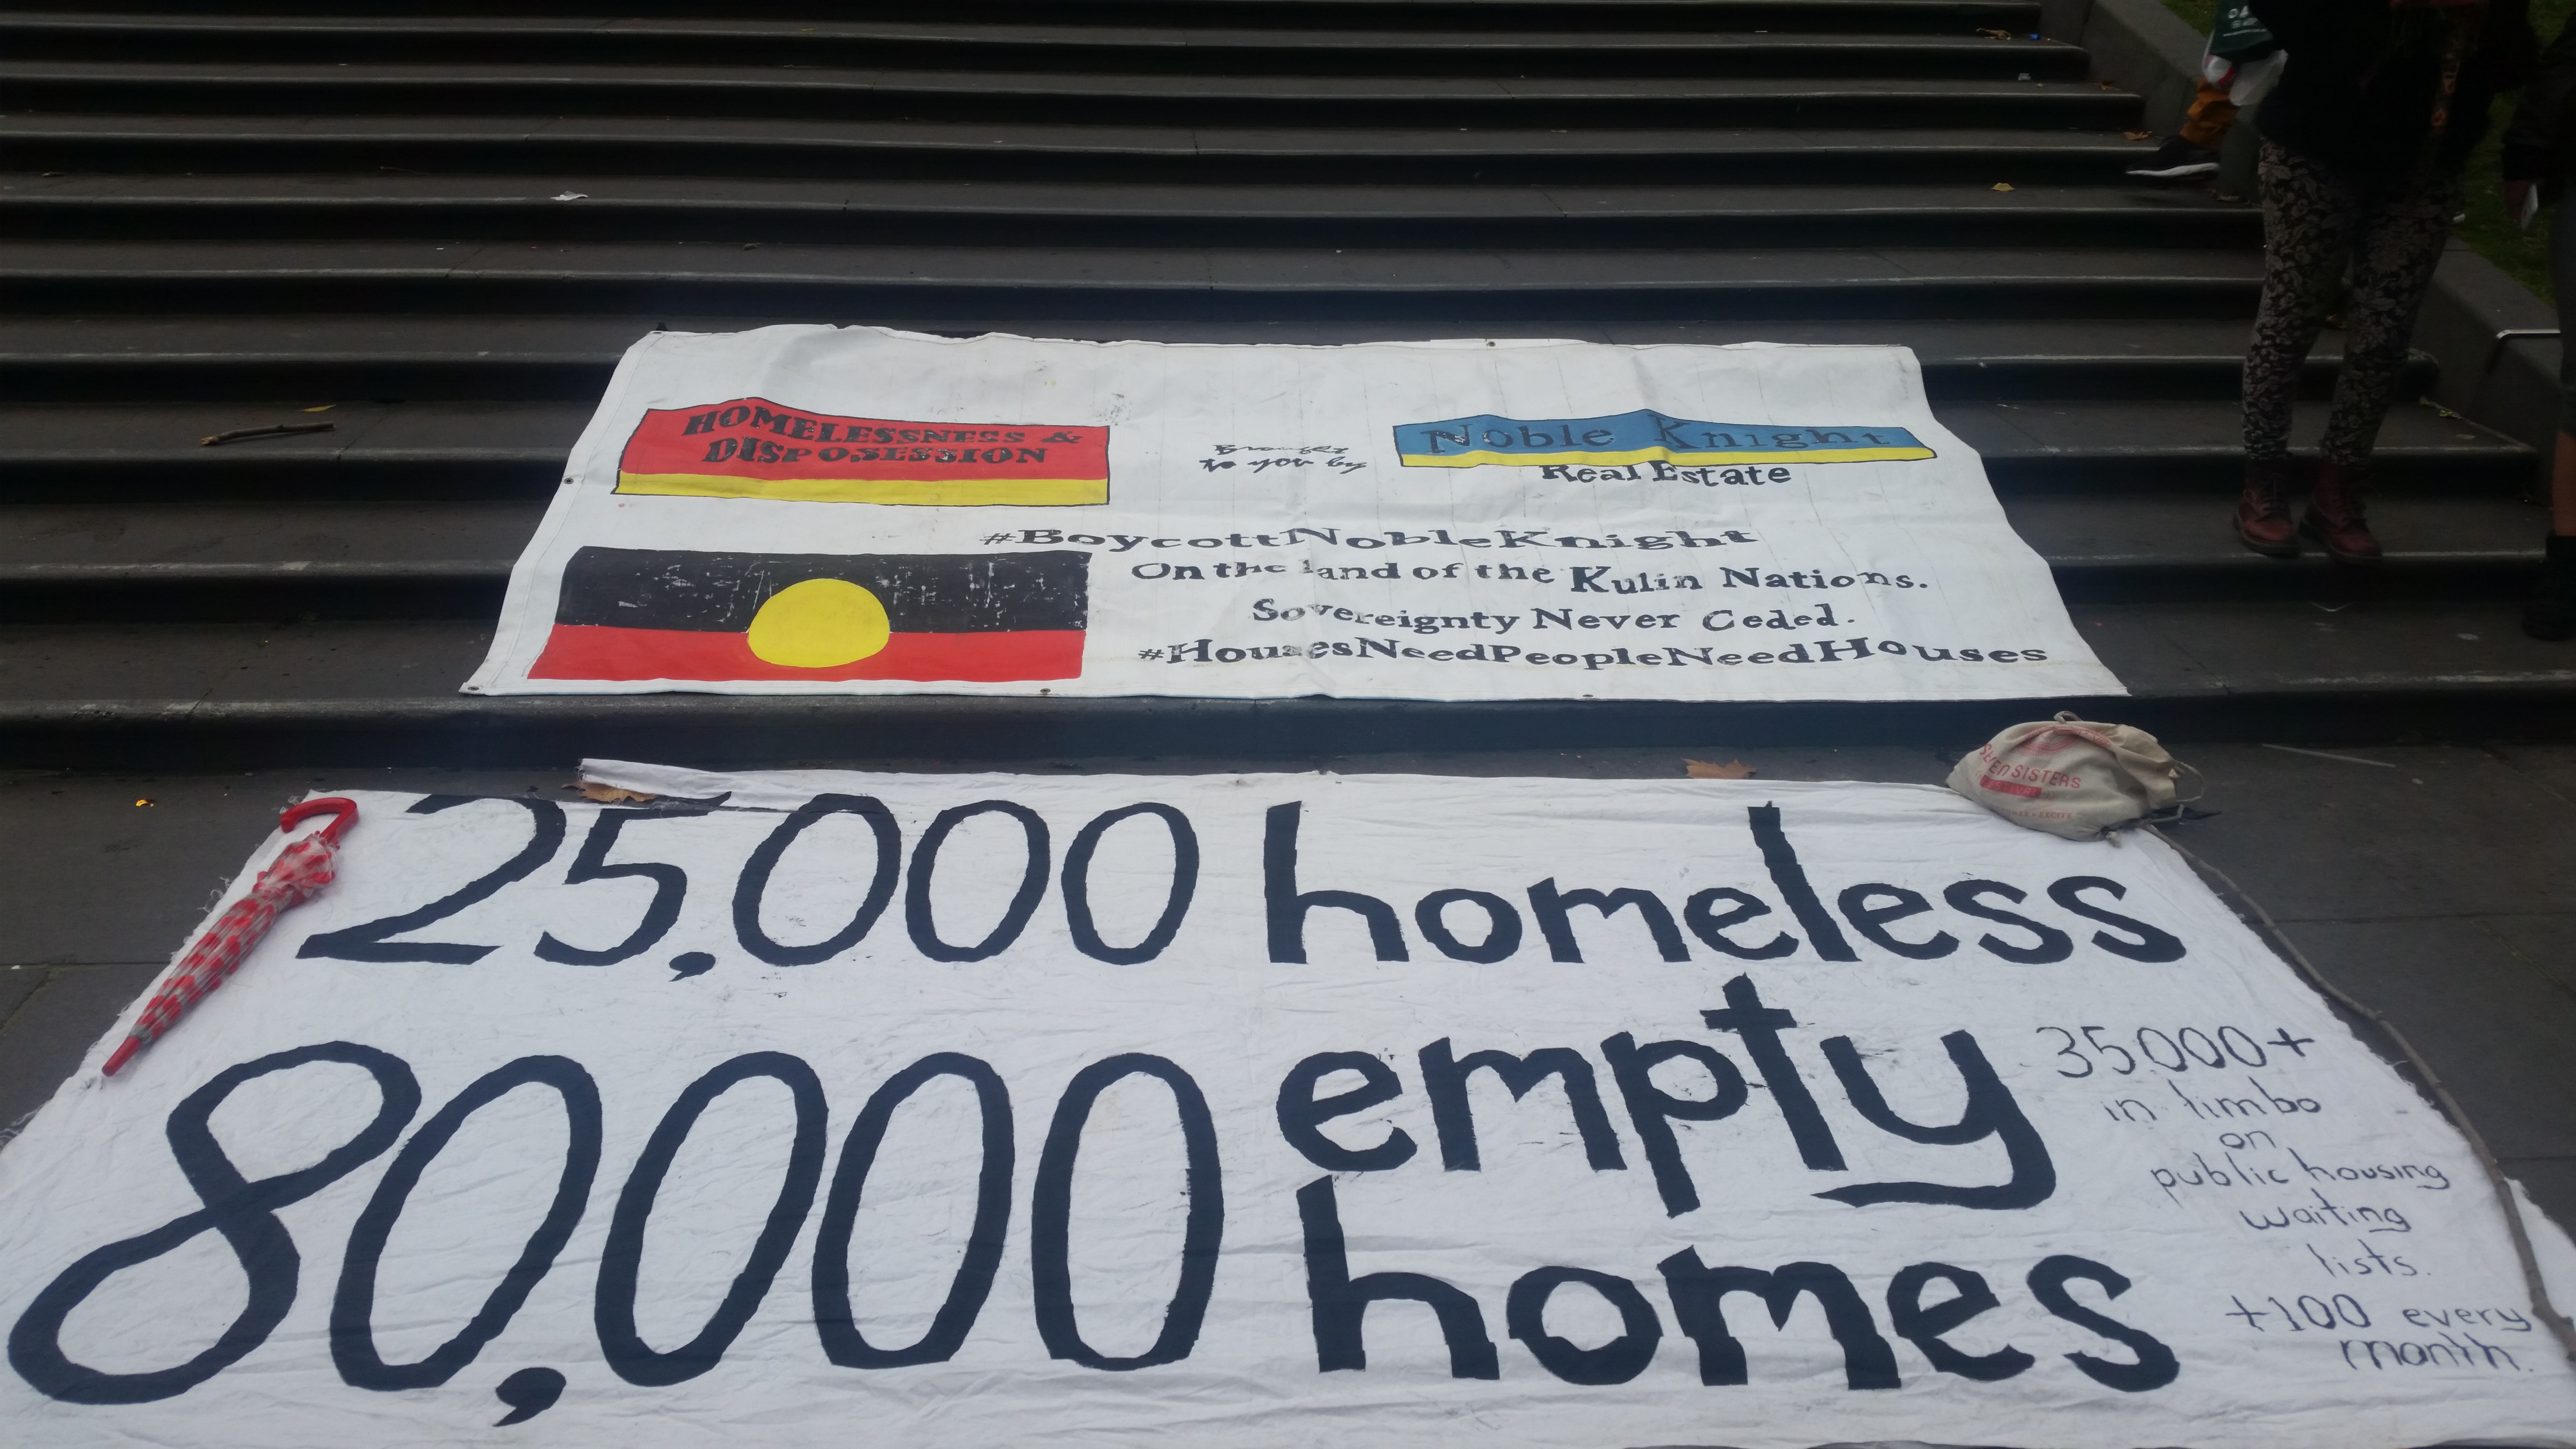 Photo of banners on the state library steps featuring the main one: 25,000 homeless, 80,000 empty homes in big text (in small text 35,000 in limbo on public housing waiting lists +100 every month). There are two other banners in the background, one has the Aboriginal flag and sovereignty never ceded as part of its text. 